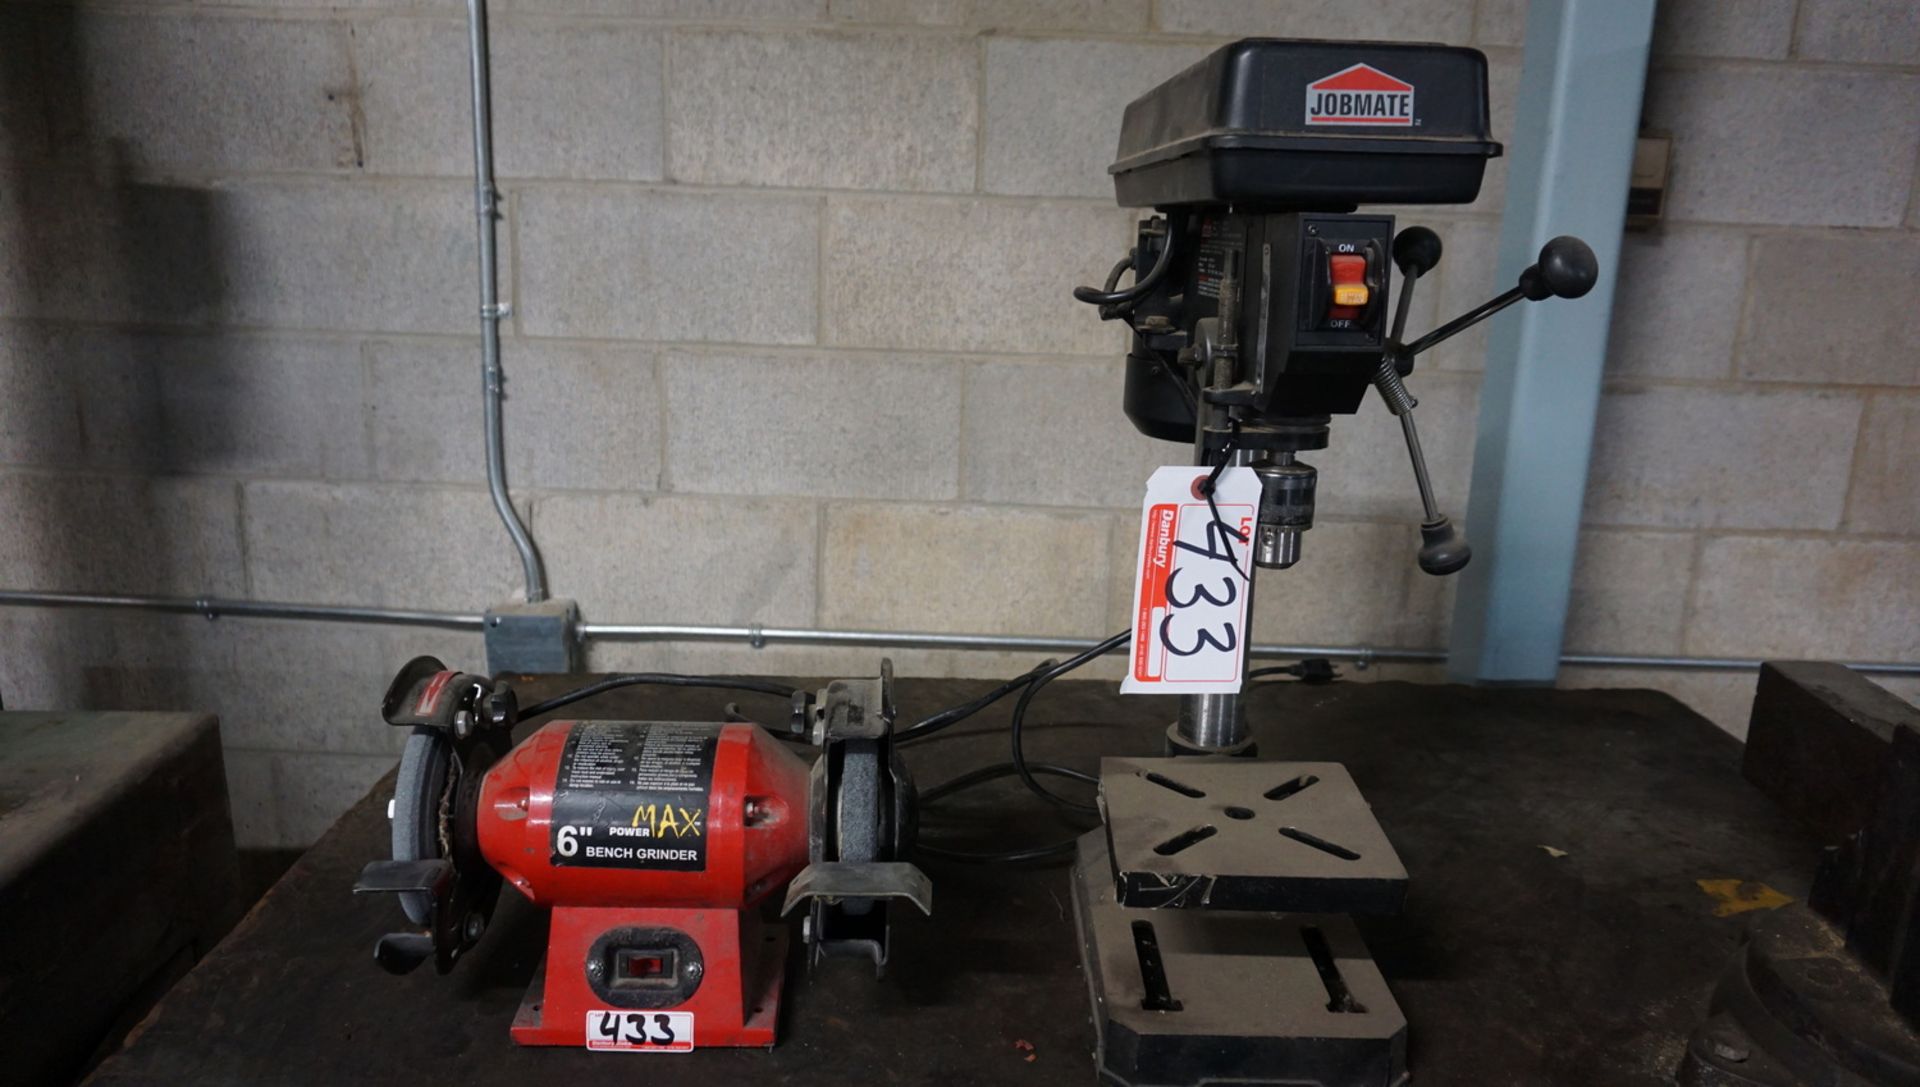 LOT - JOBMATE BENCH TOP DRILL PRESS W/ POWER MAX 6" BENCH GRINDER